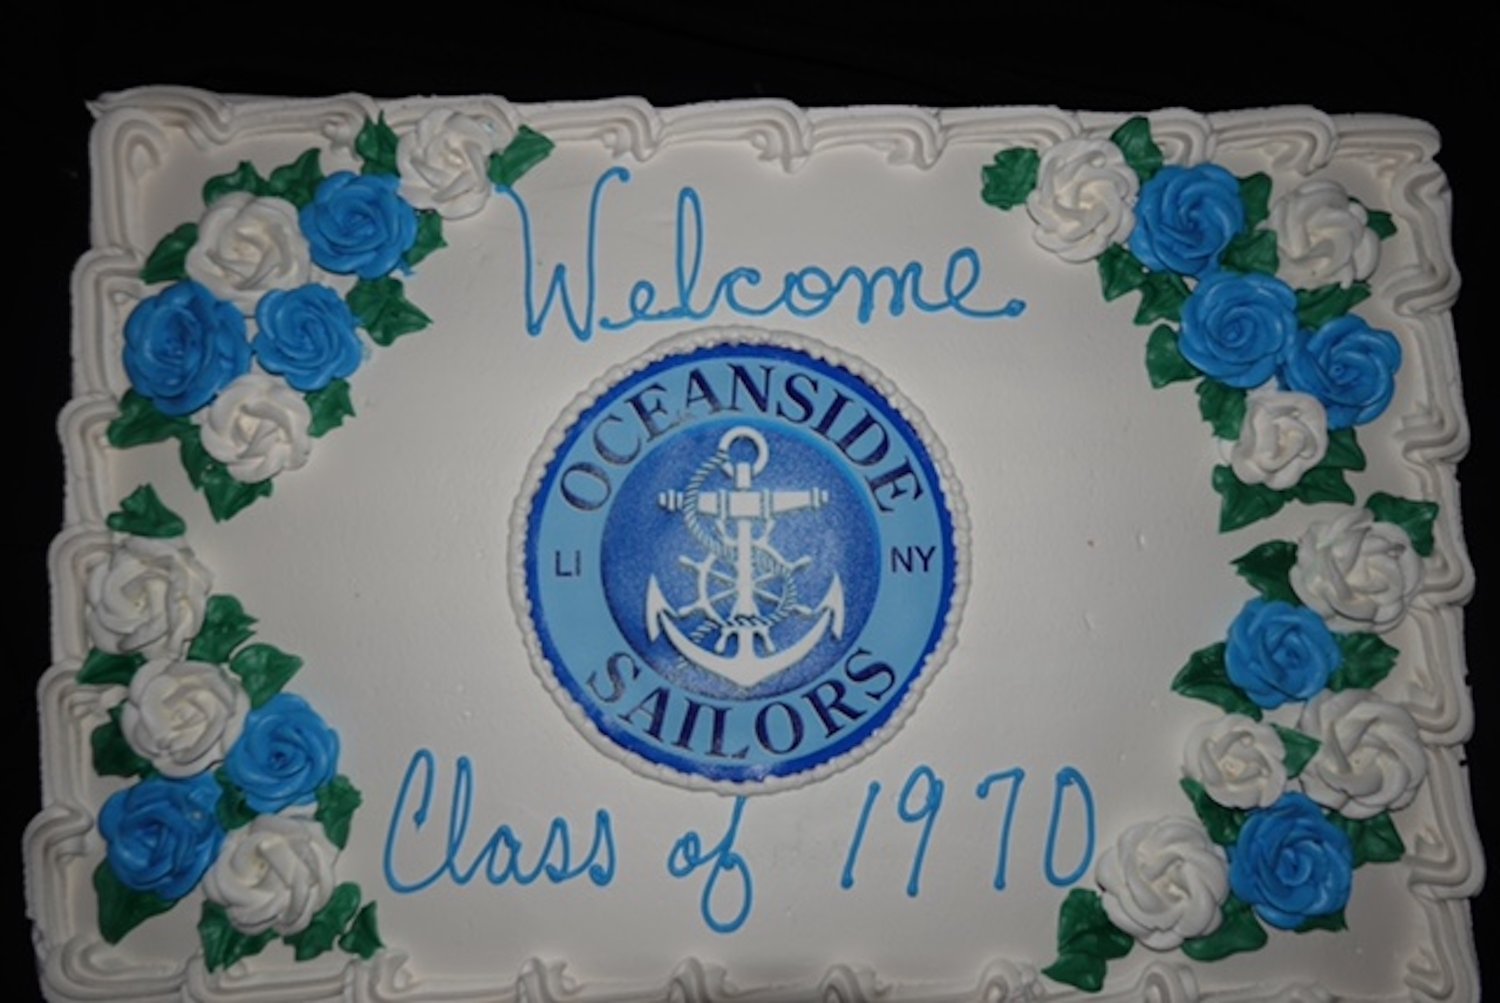 The Oceanside High School class of 1970 recently celebrated its 52nd reunion, twice delayed by Covid-19, where they donated $14,000 to the Luis Alvarez Fund